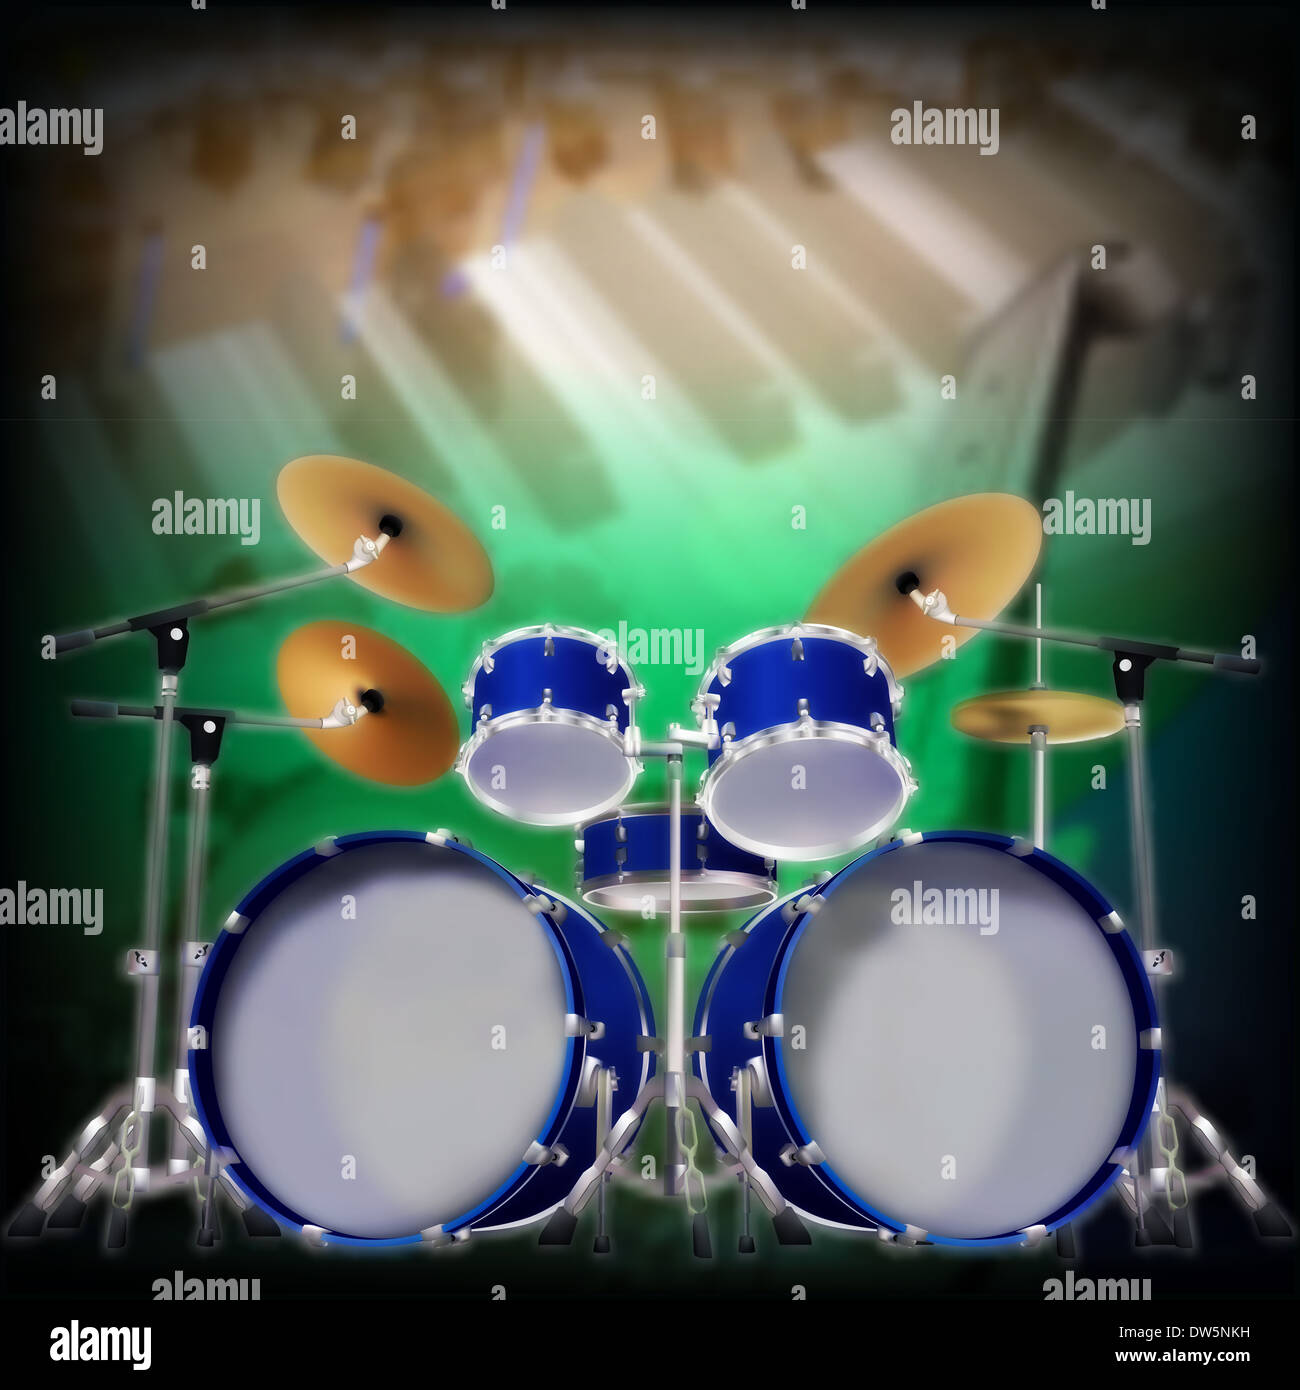 abstract music background with blue drum kit Stock Photo